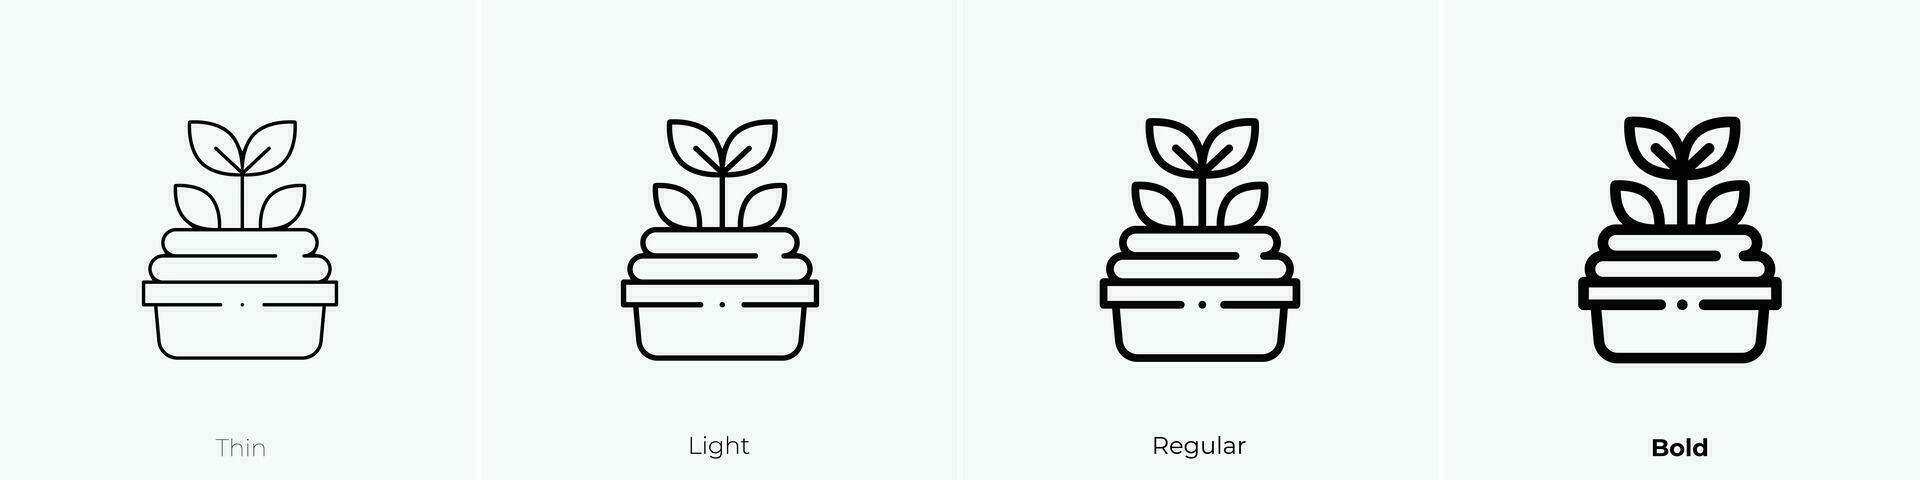 plant icon. Thin, Light, Regular And Bold style design isolated on white background vector